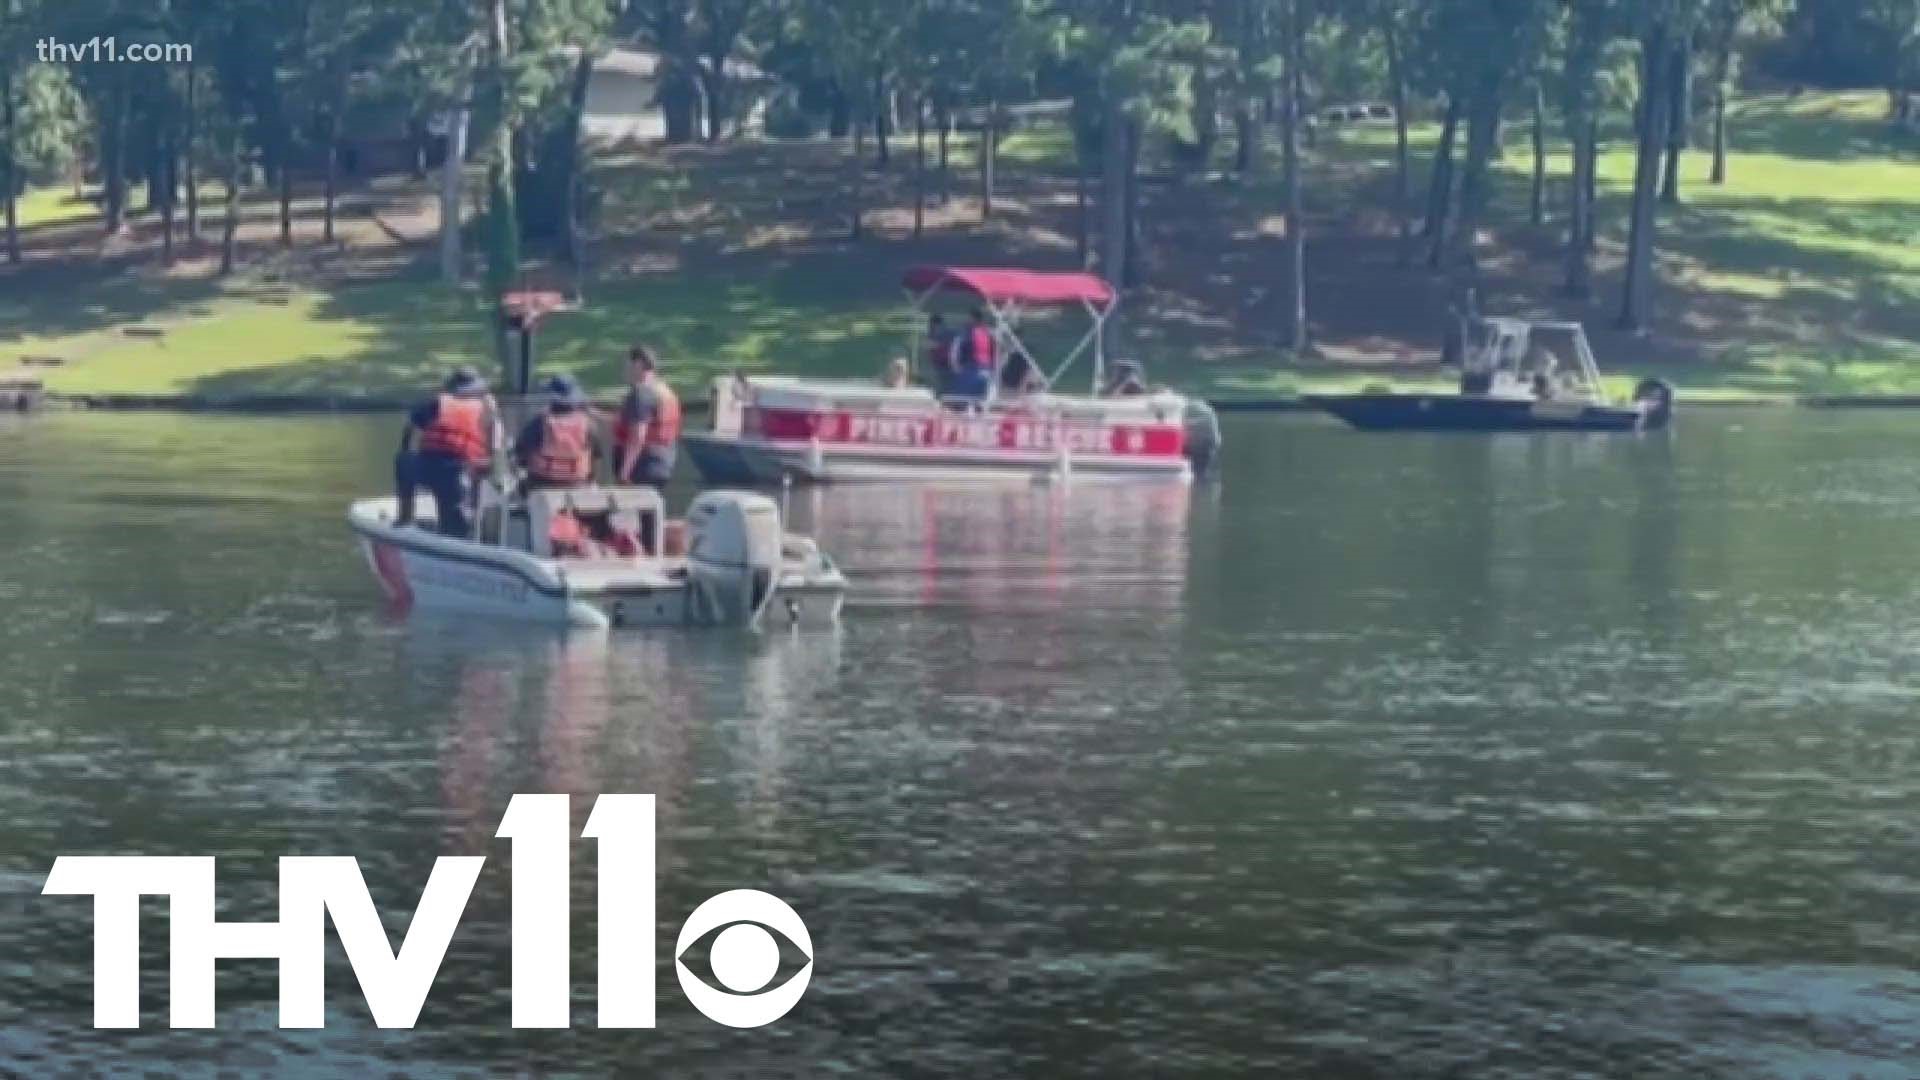 The Garland County Sheriff's Office confirmed that a plane crashed into the water on Lake Hamilton in Hot Springs, resulting in one death.